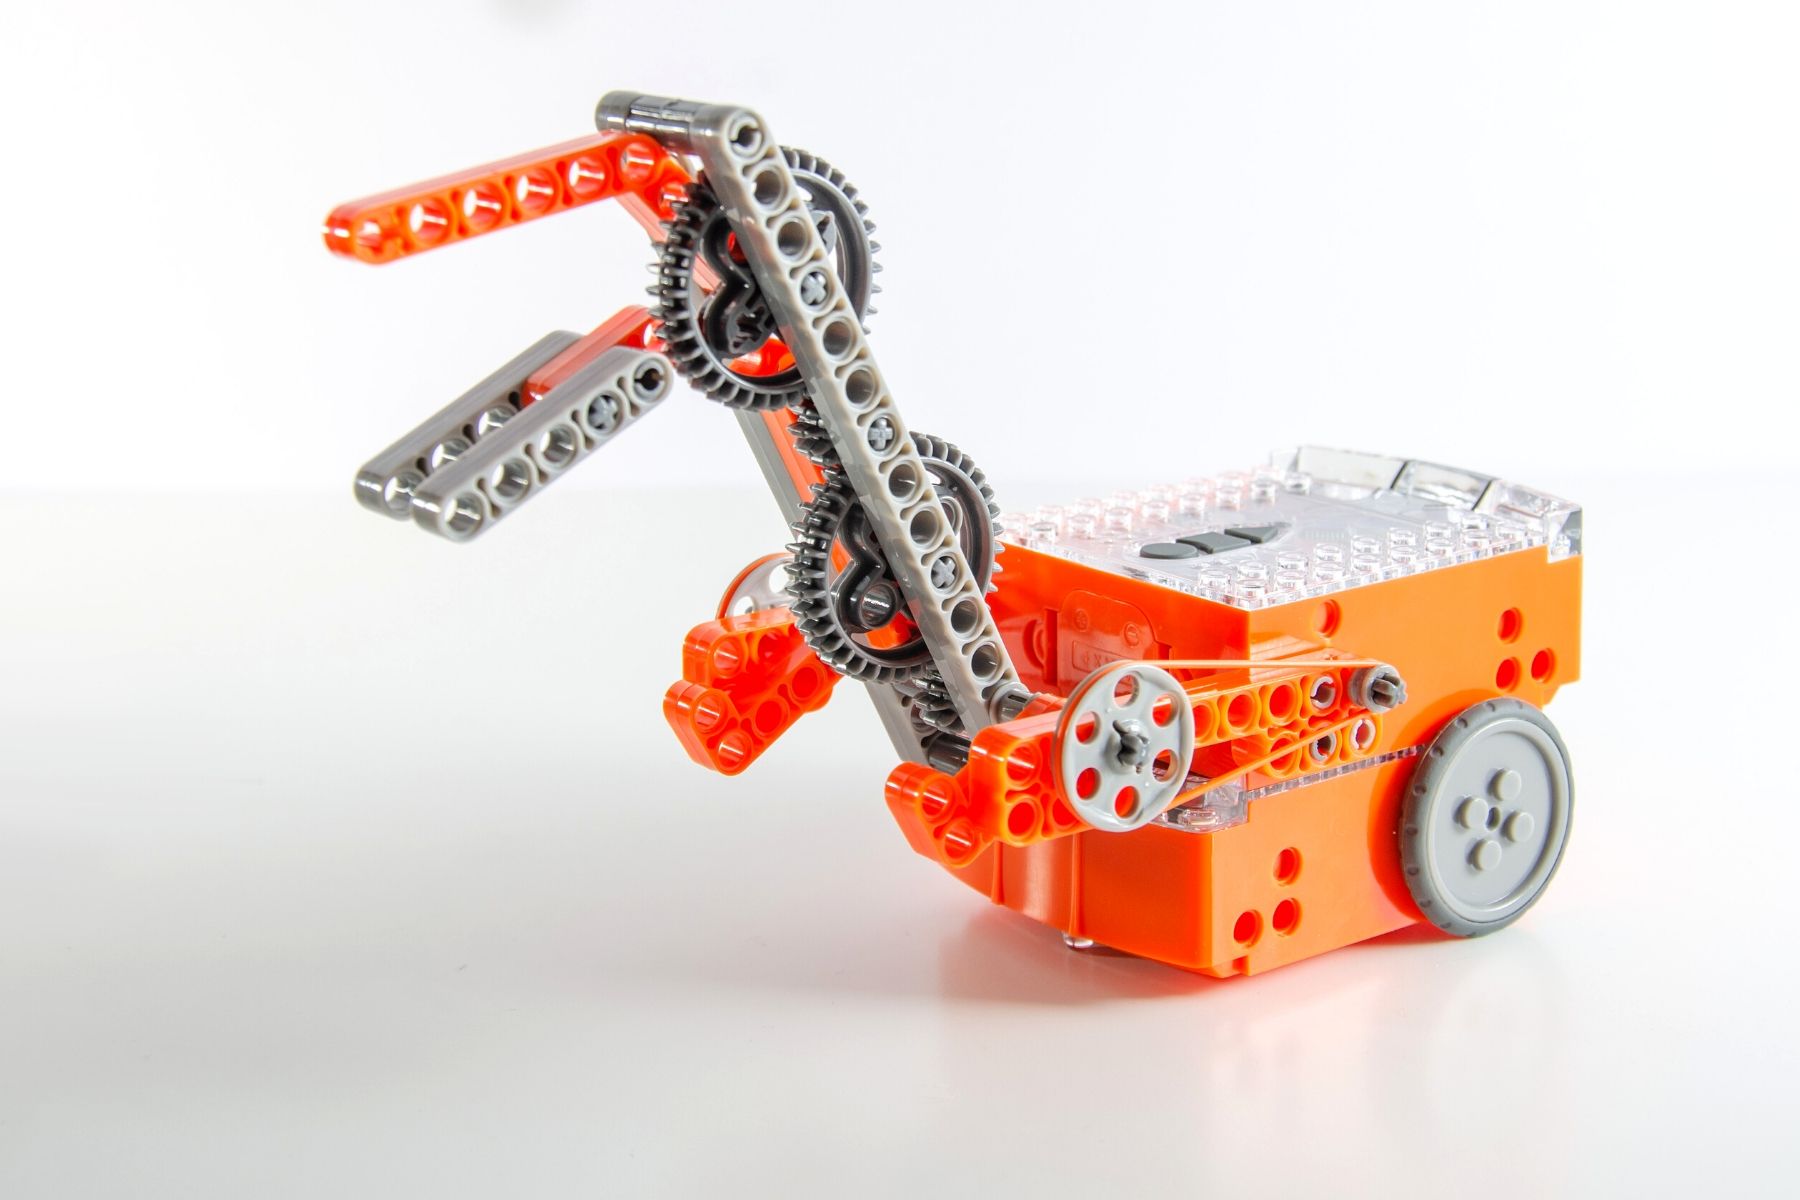 Edison Review: The missing link educational robotics